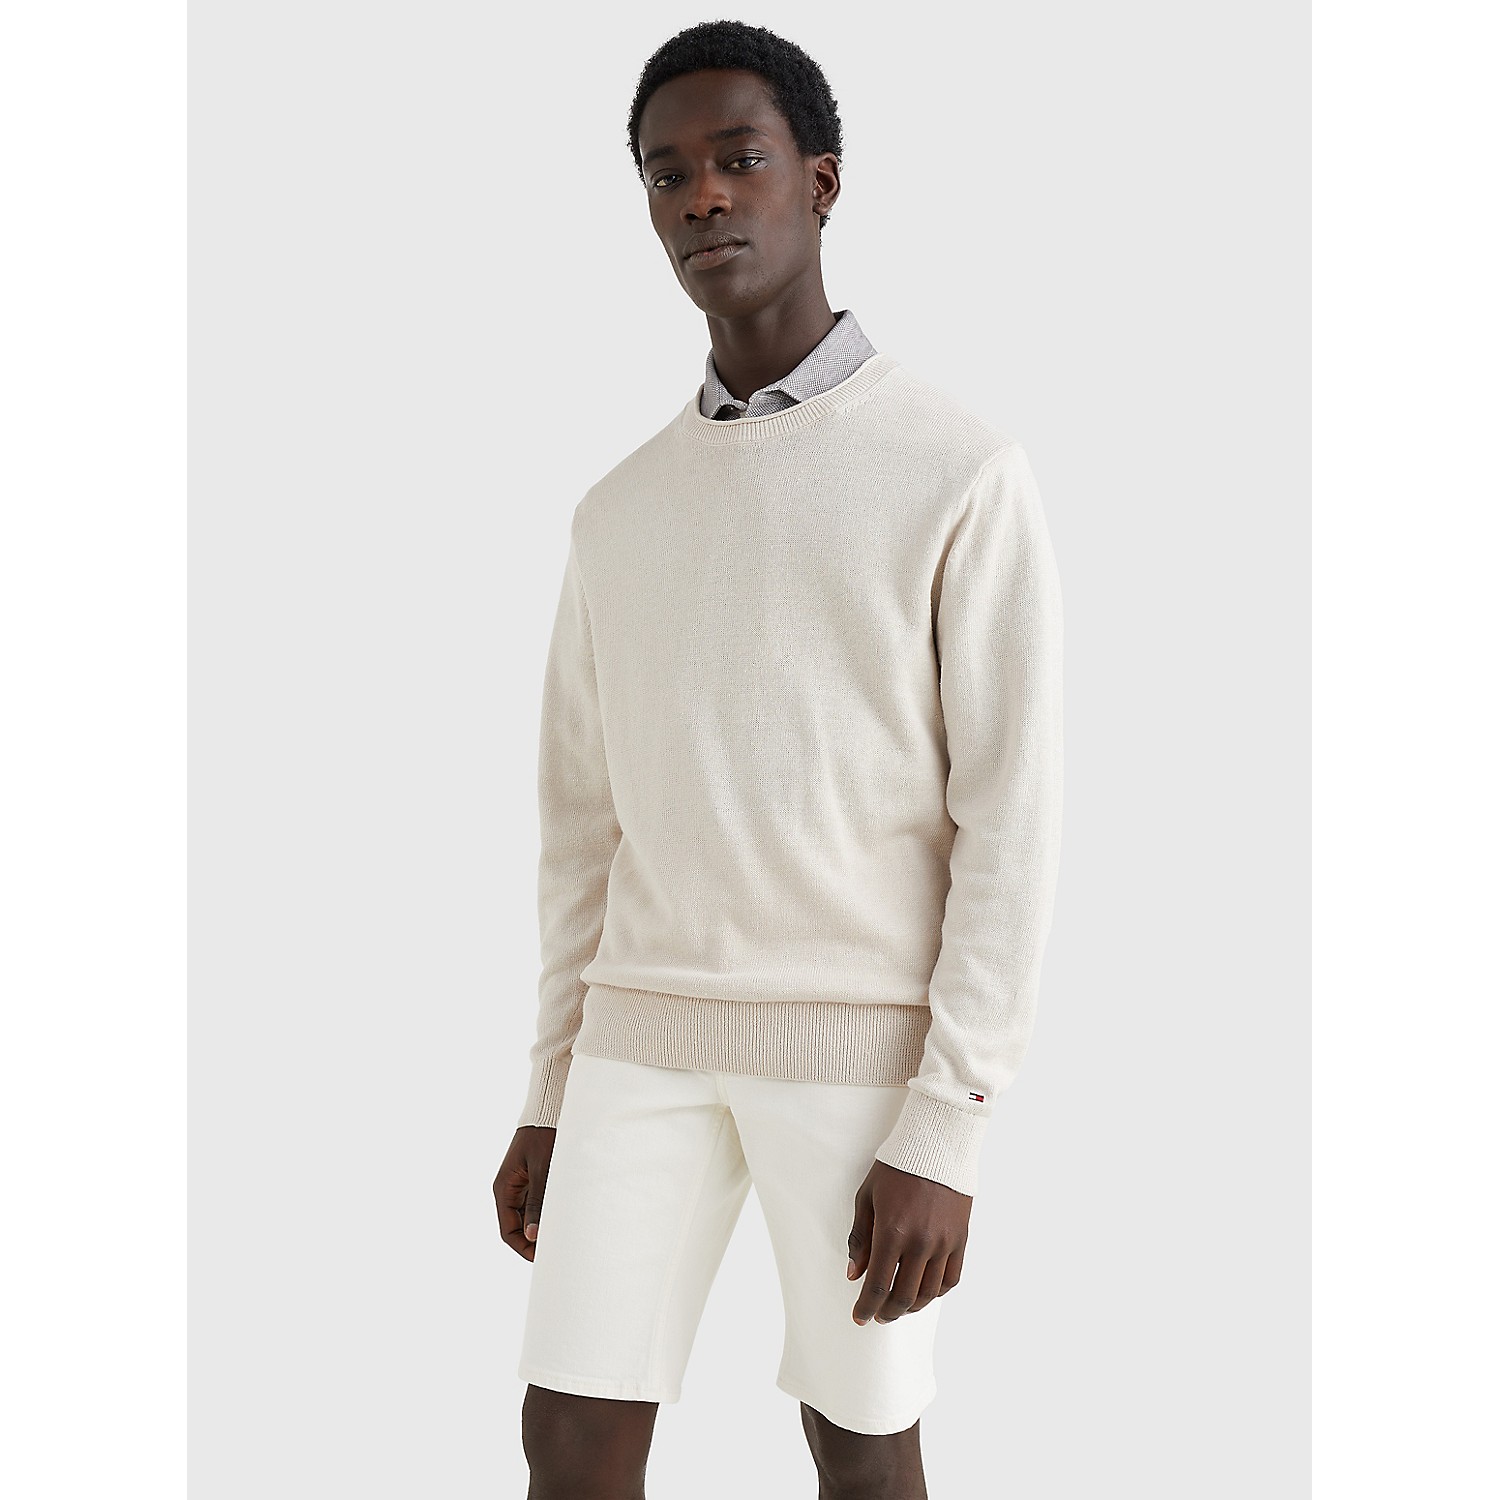 TOMMY HILFIGER Solid Rolled Linen Sweater